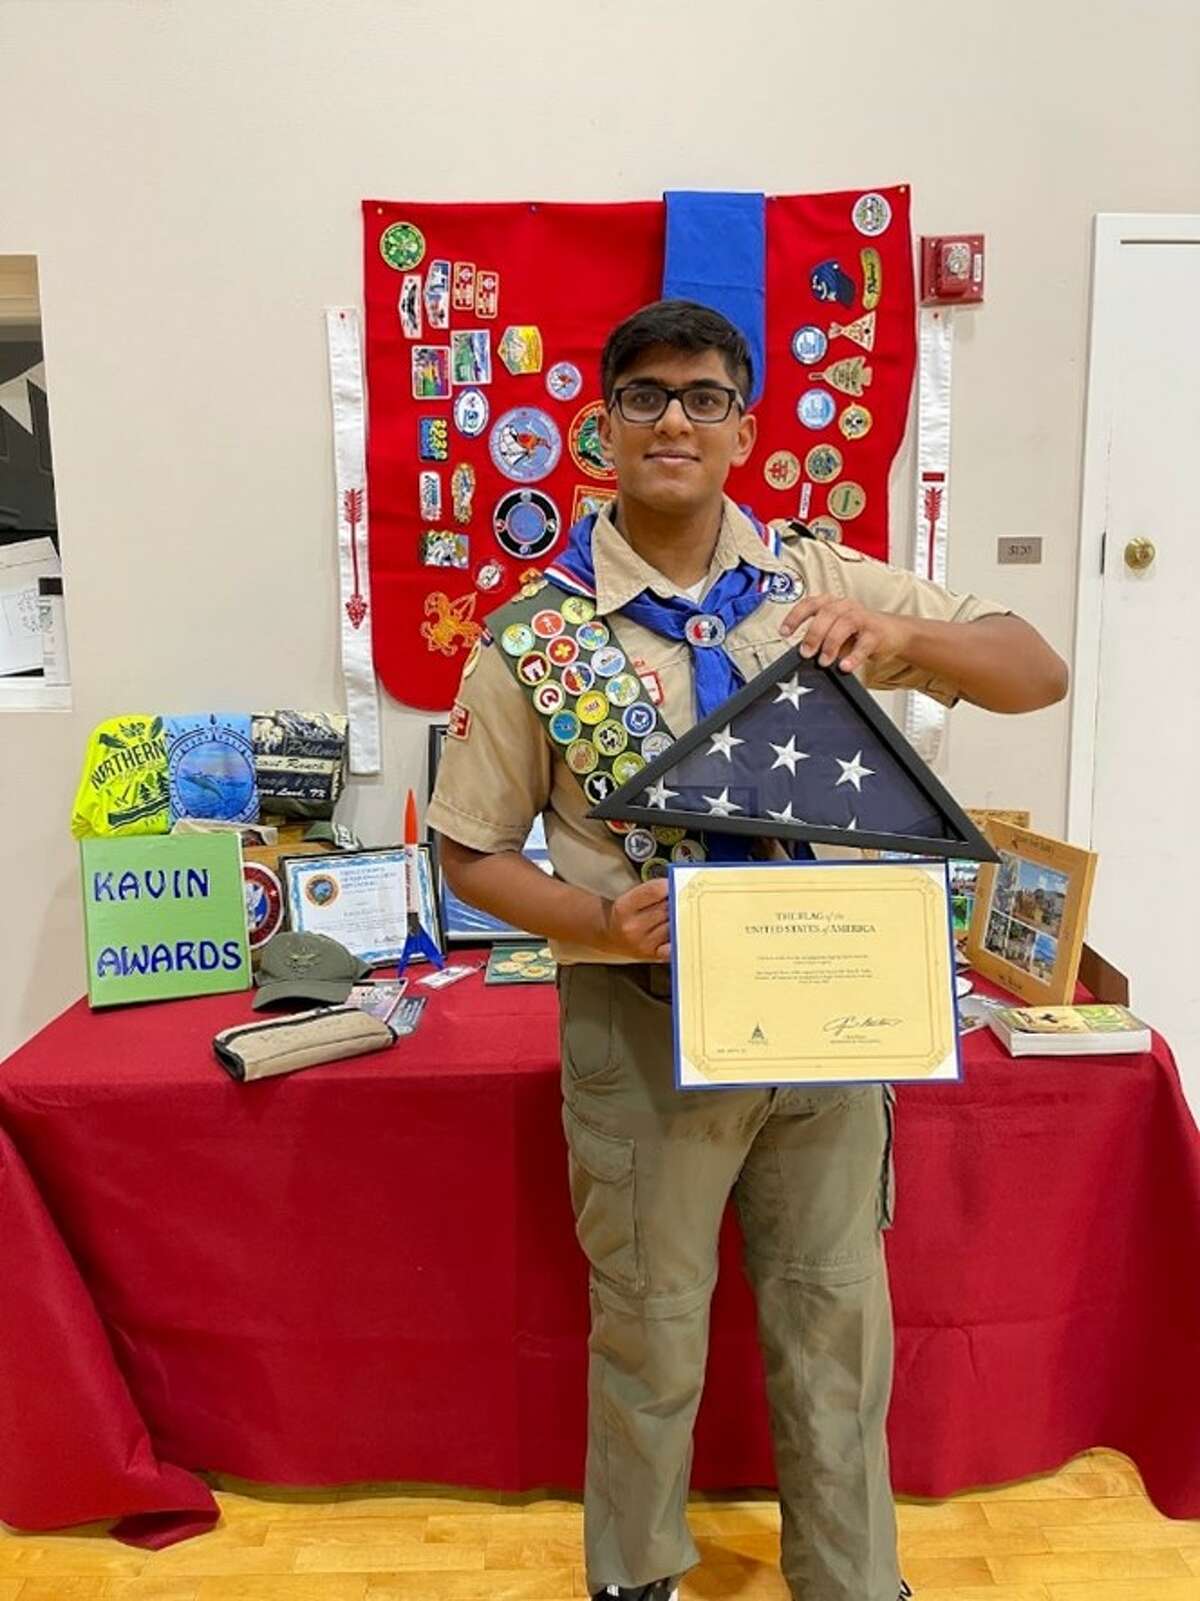 At the ceremony, Kavin received flag commemorating his Eagle award that had flown over the U.S. Capitol. The flag was given by U.S. Rep. Troy Nehls.